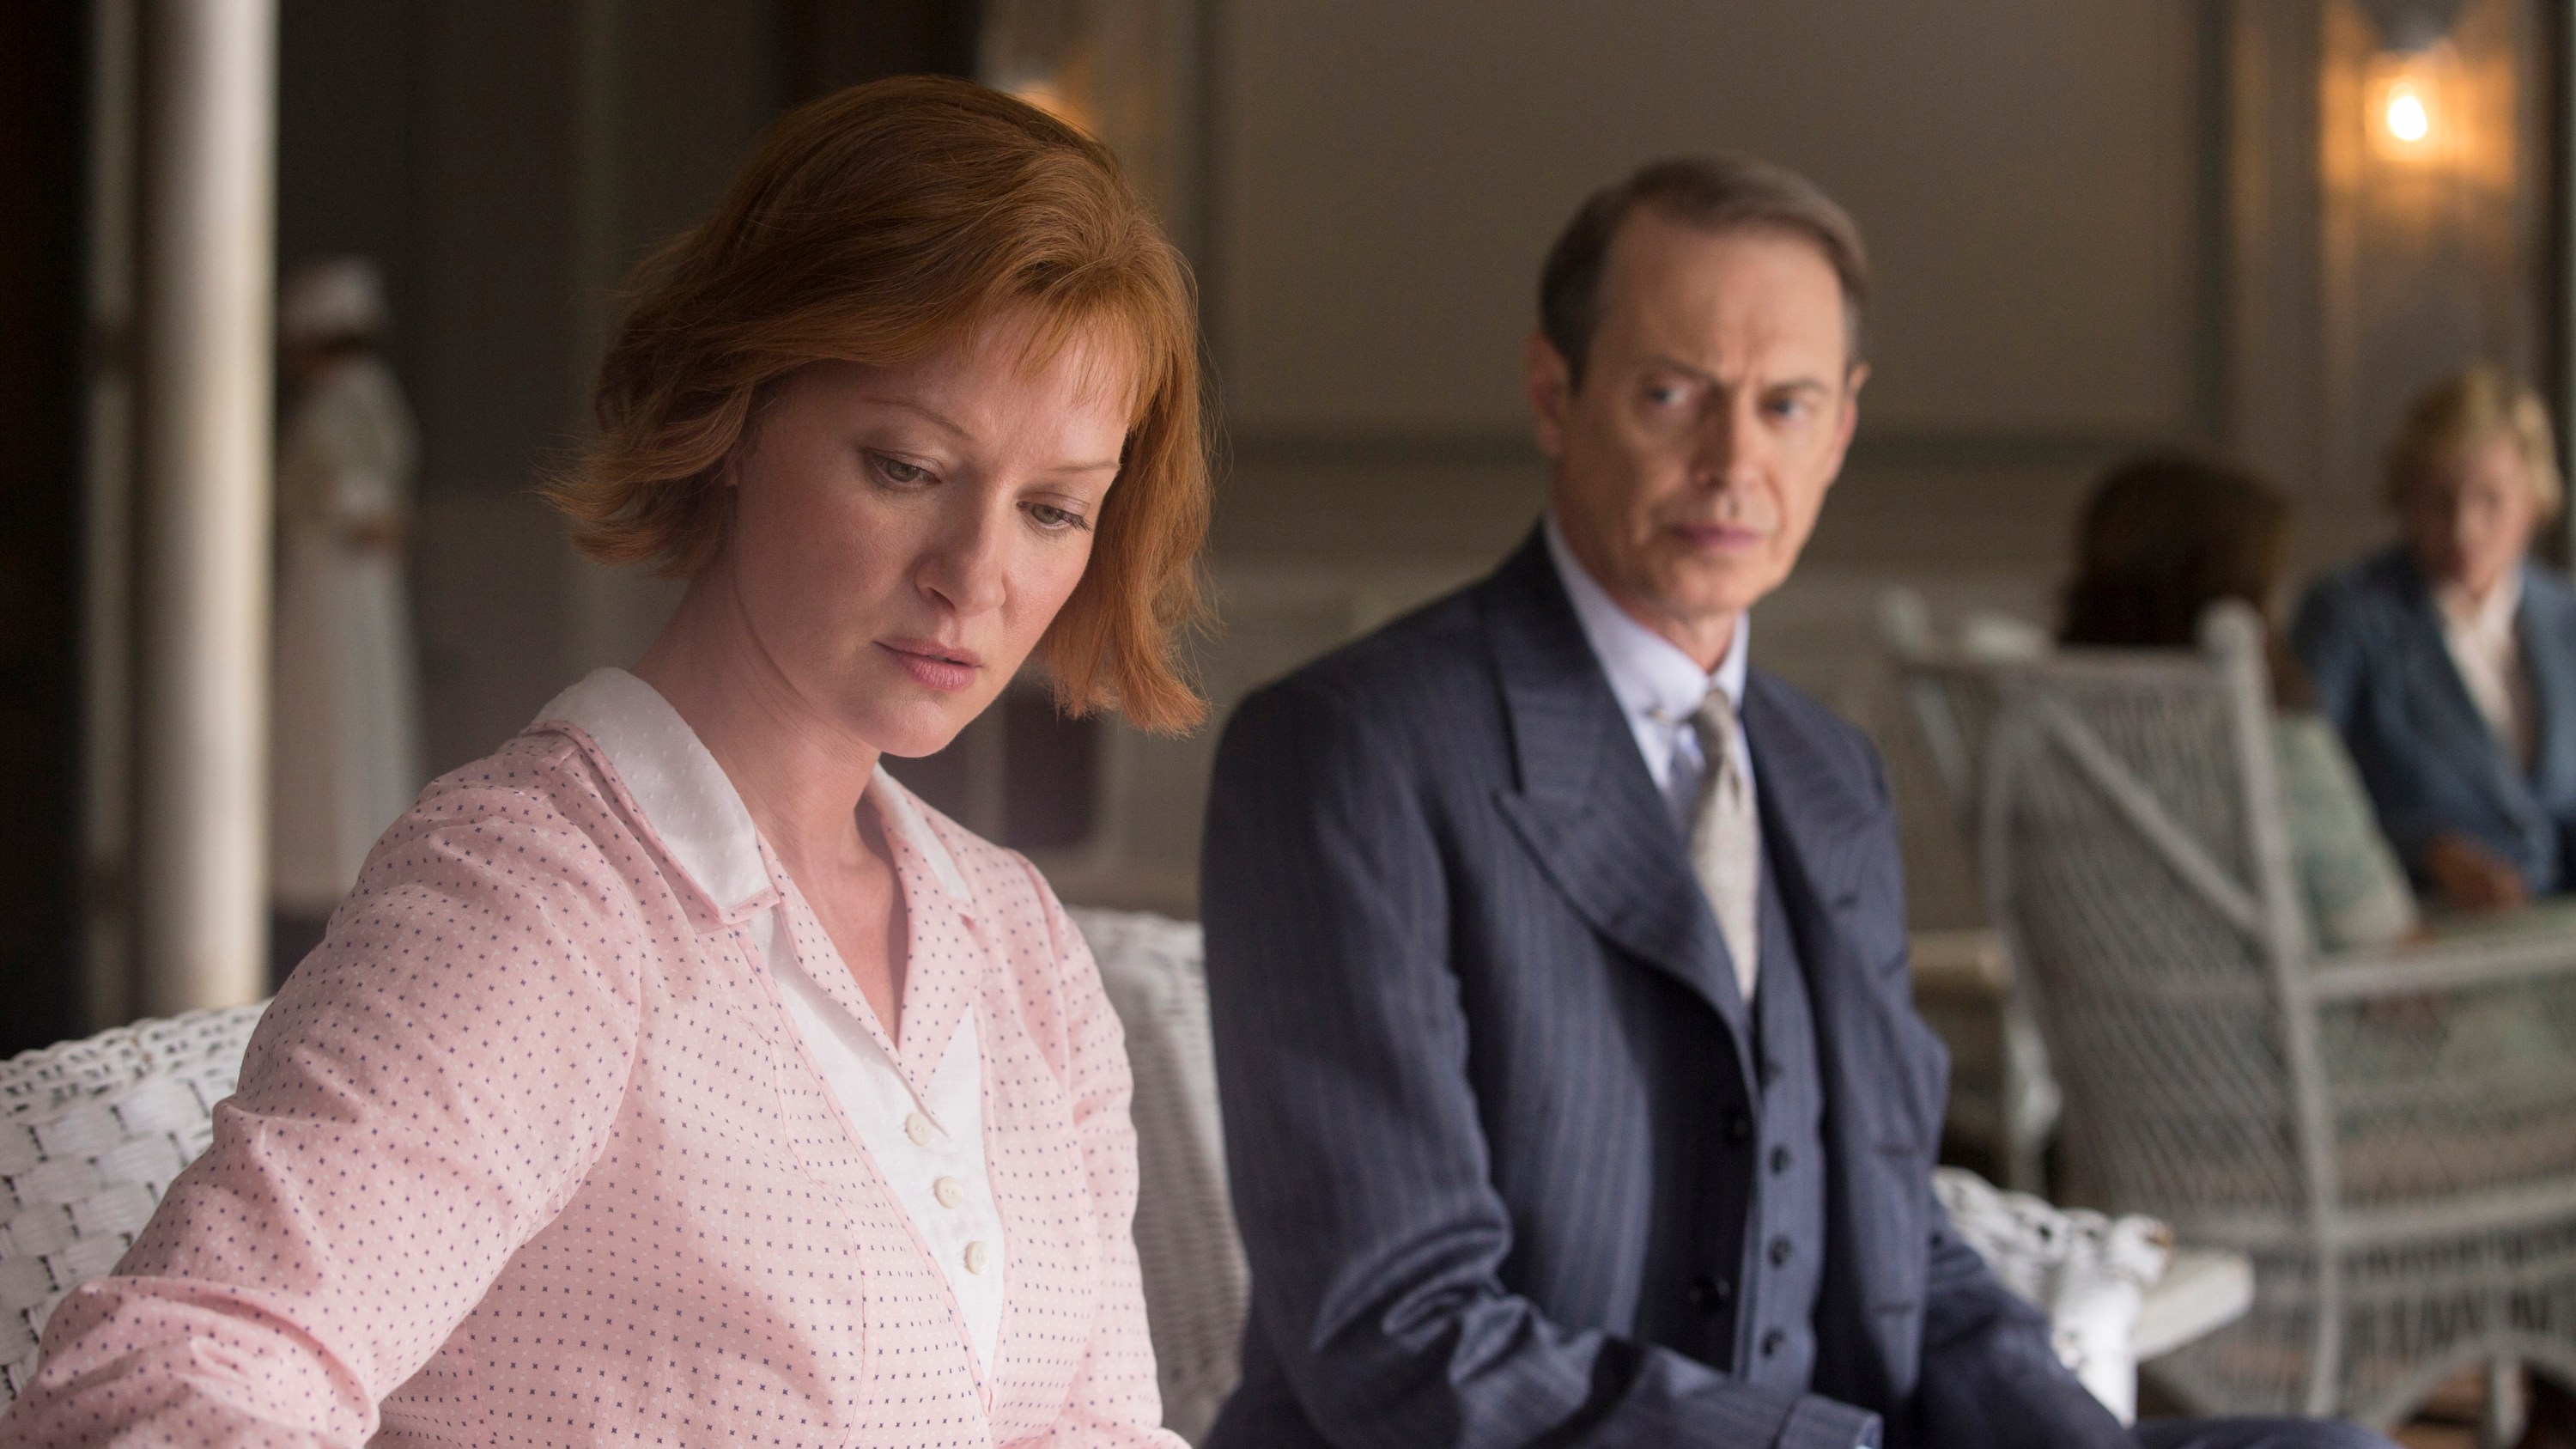 Why the 'Boardwalk Empire' Finale Reminded Us So Much of 'The Sopranos' Finale